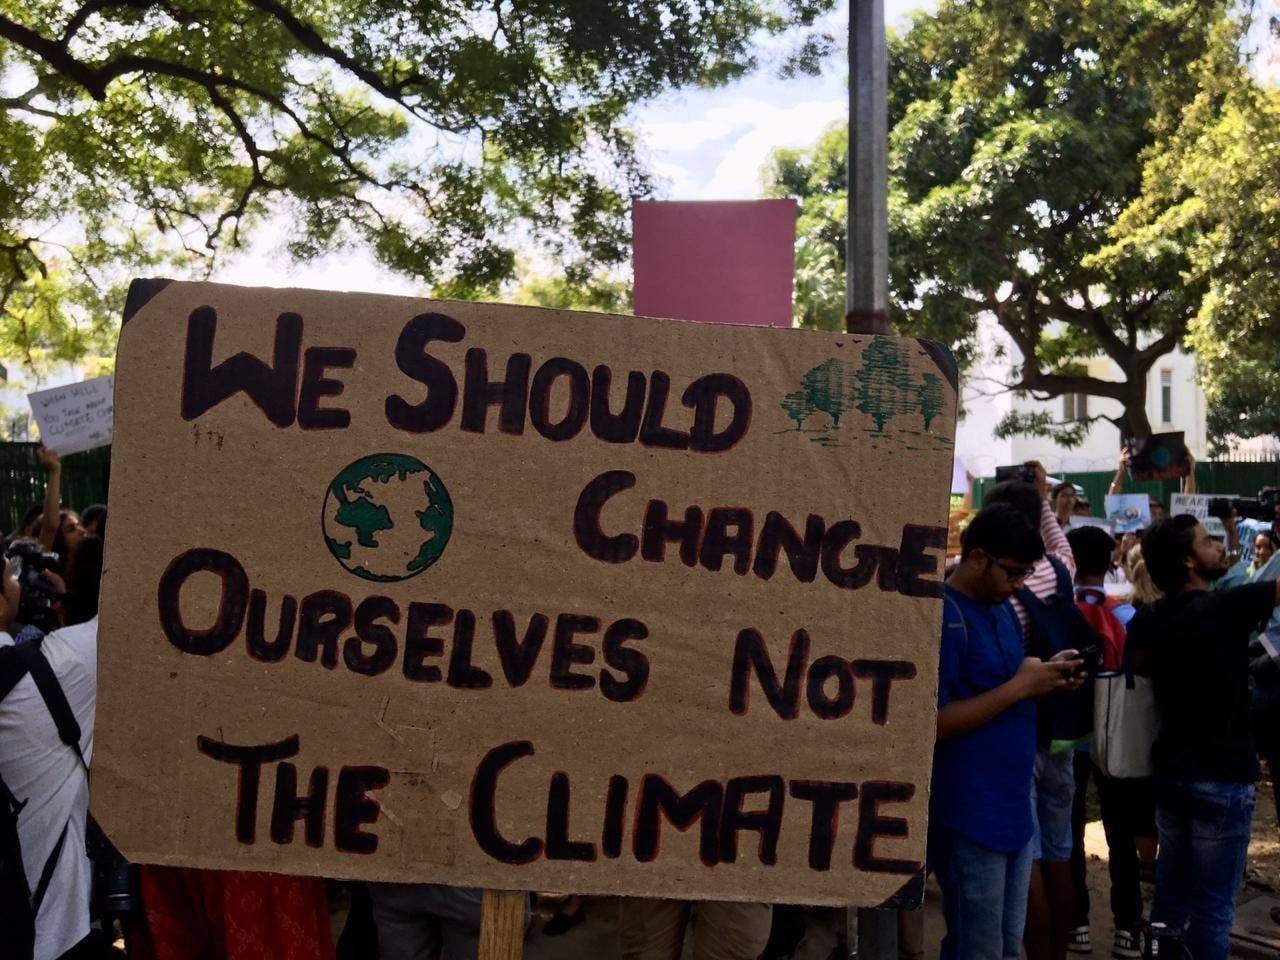 sign that reads &quot;we should change ourselfs not the climate&quot;